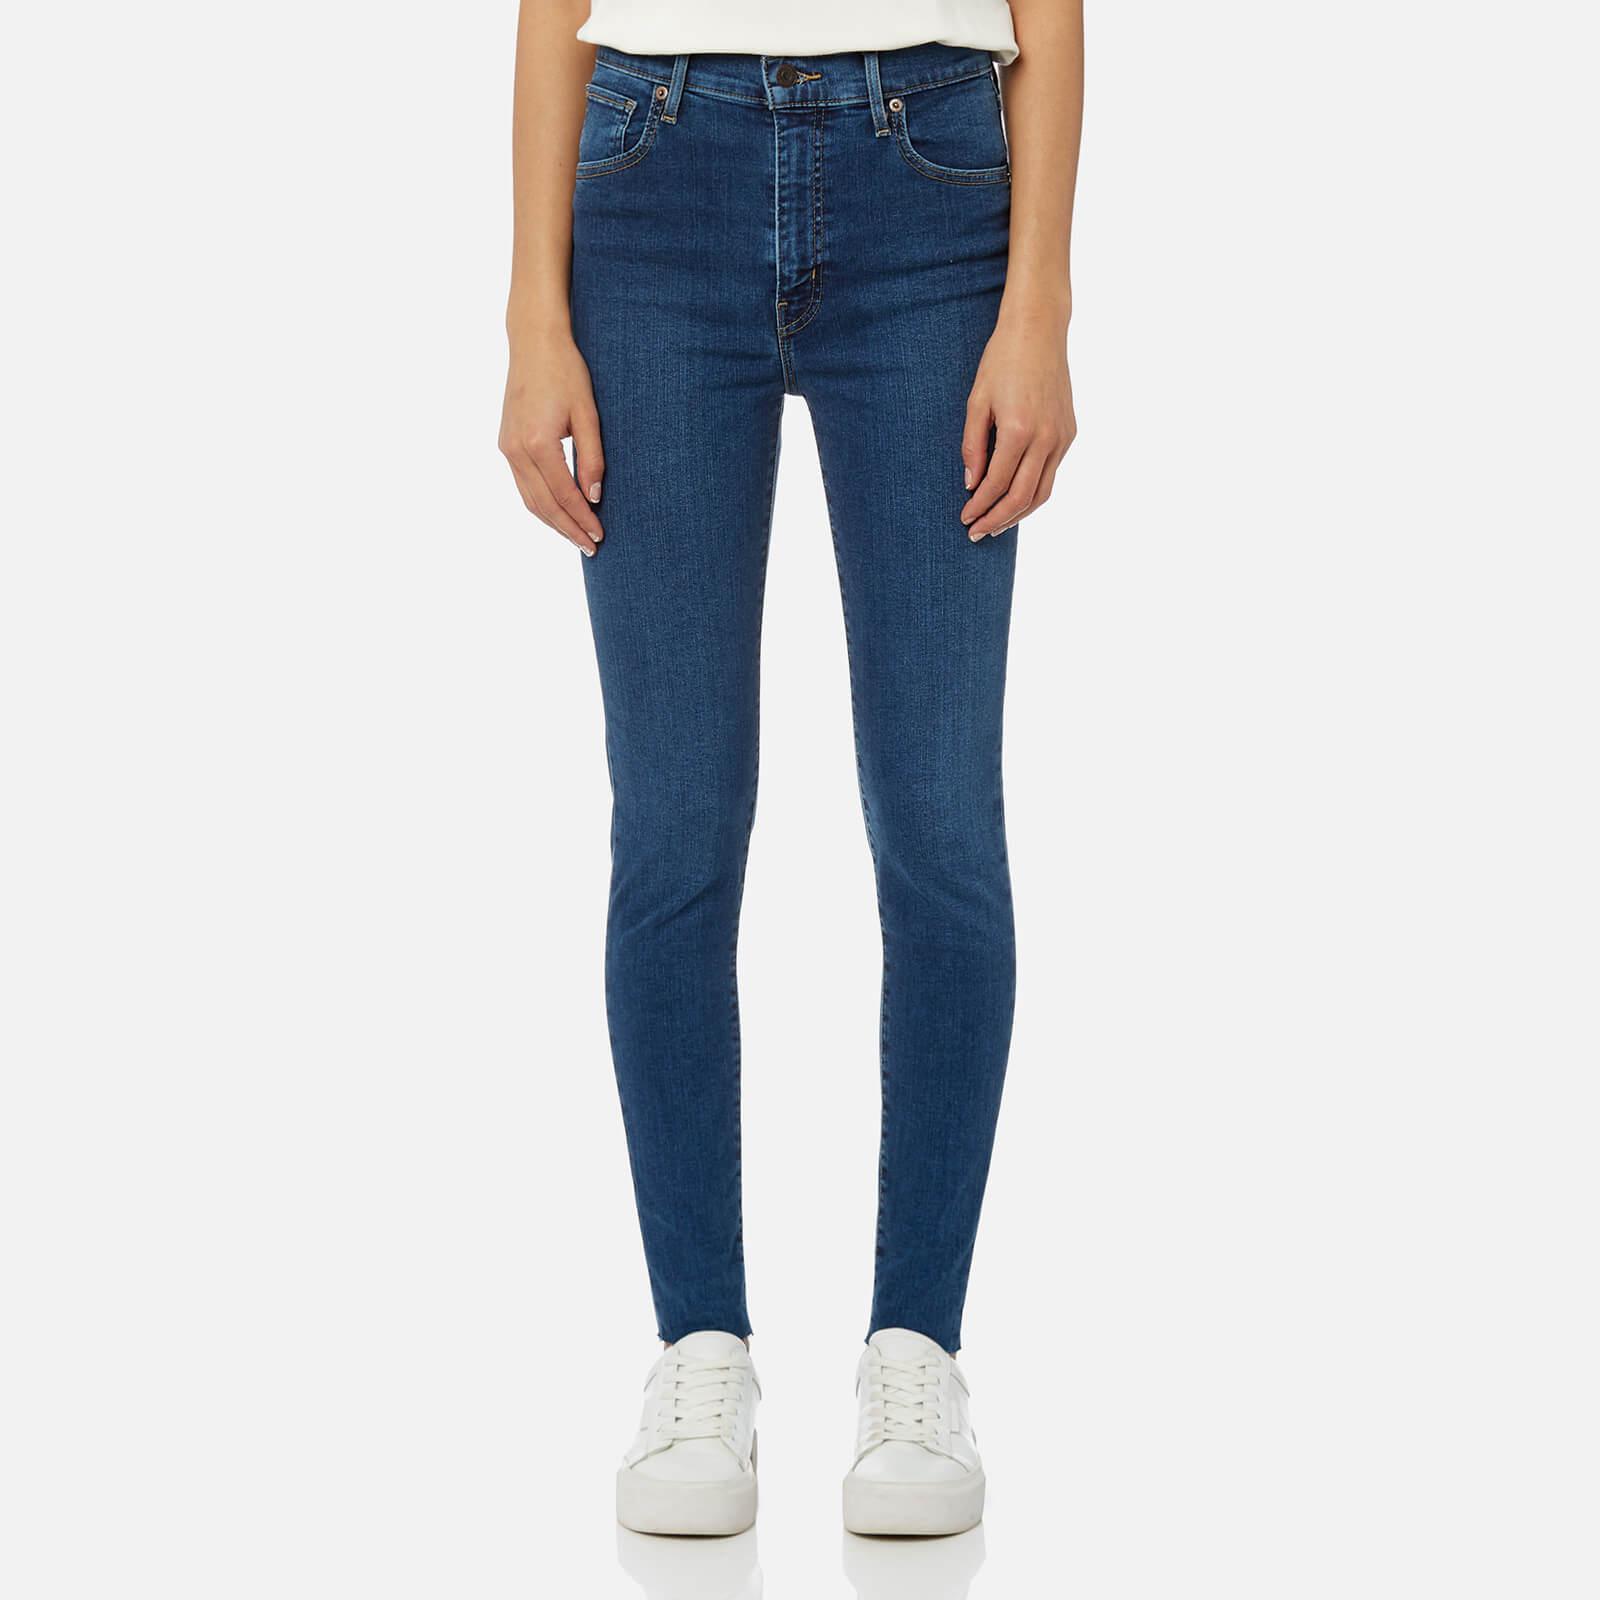 Womens levis mile high super skinny jeans